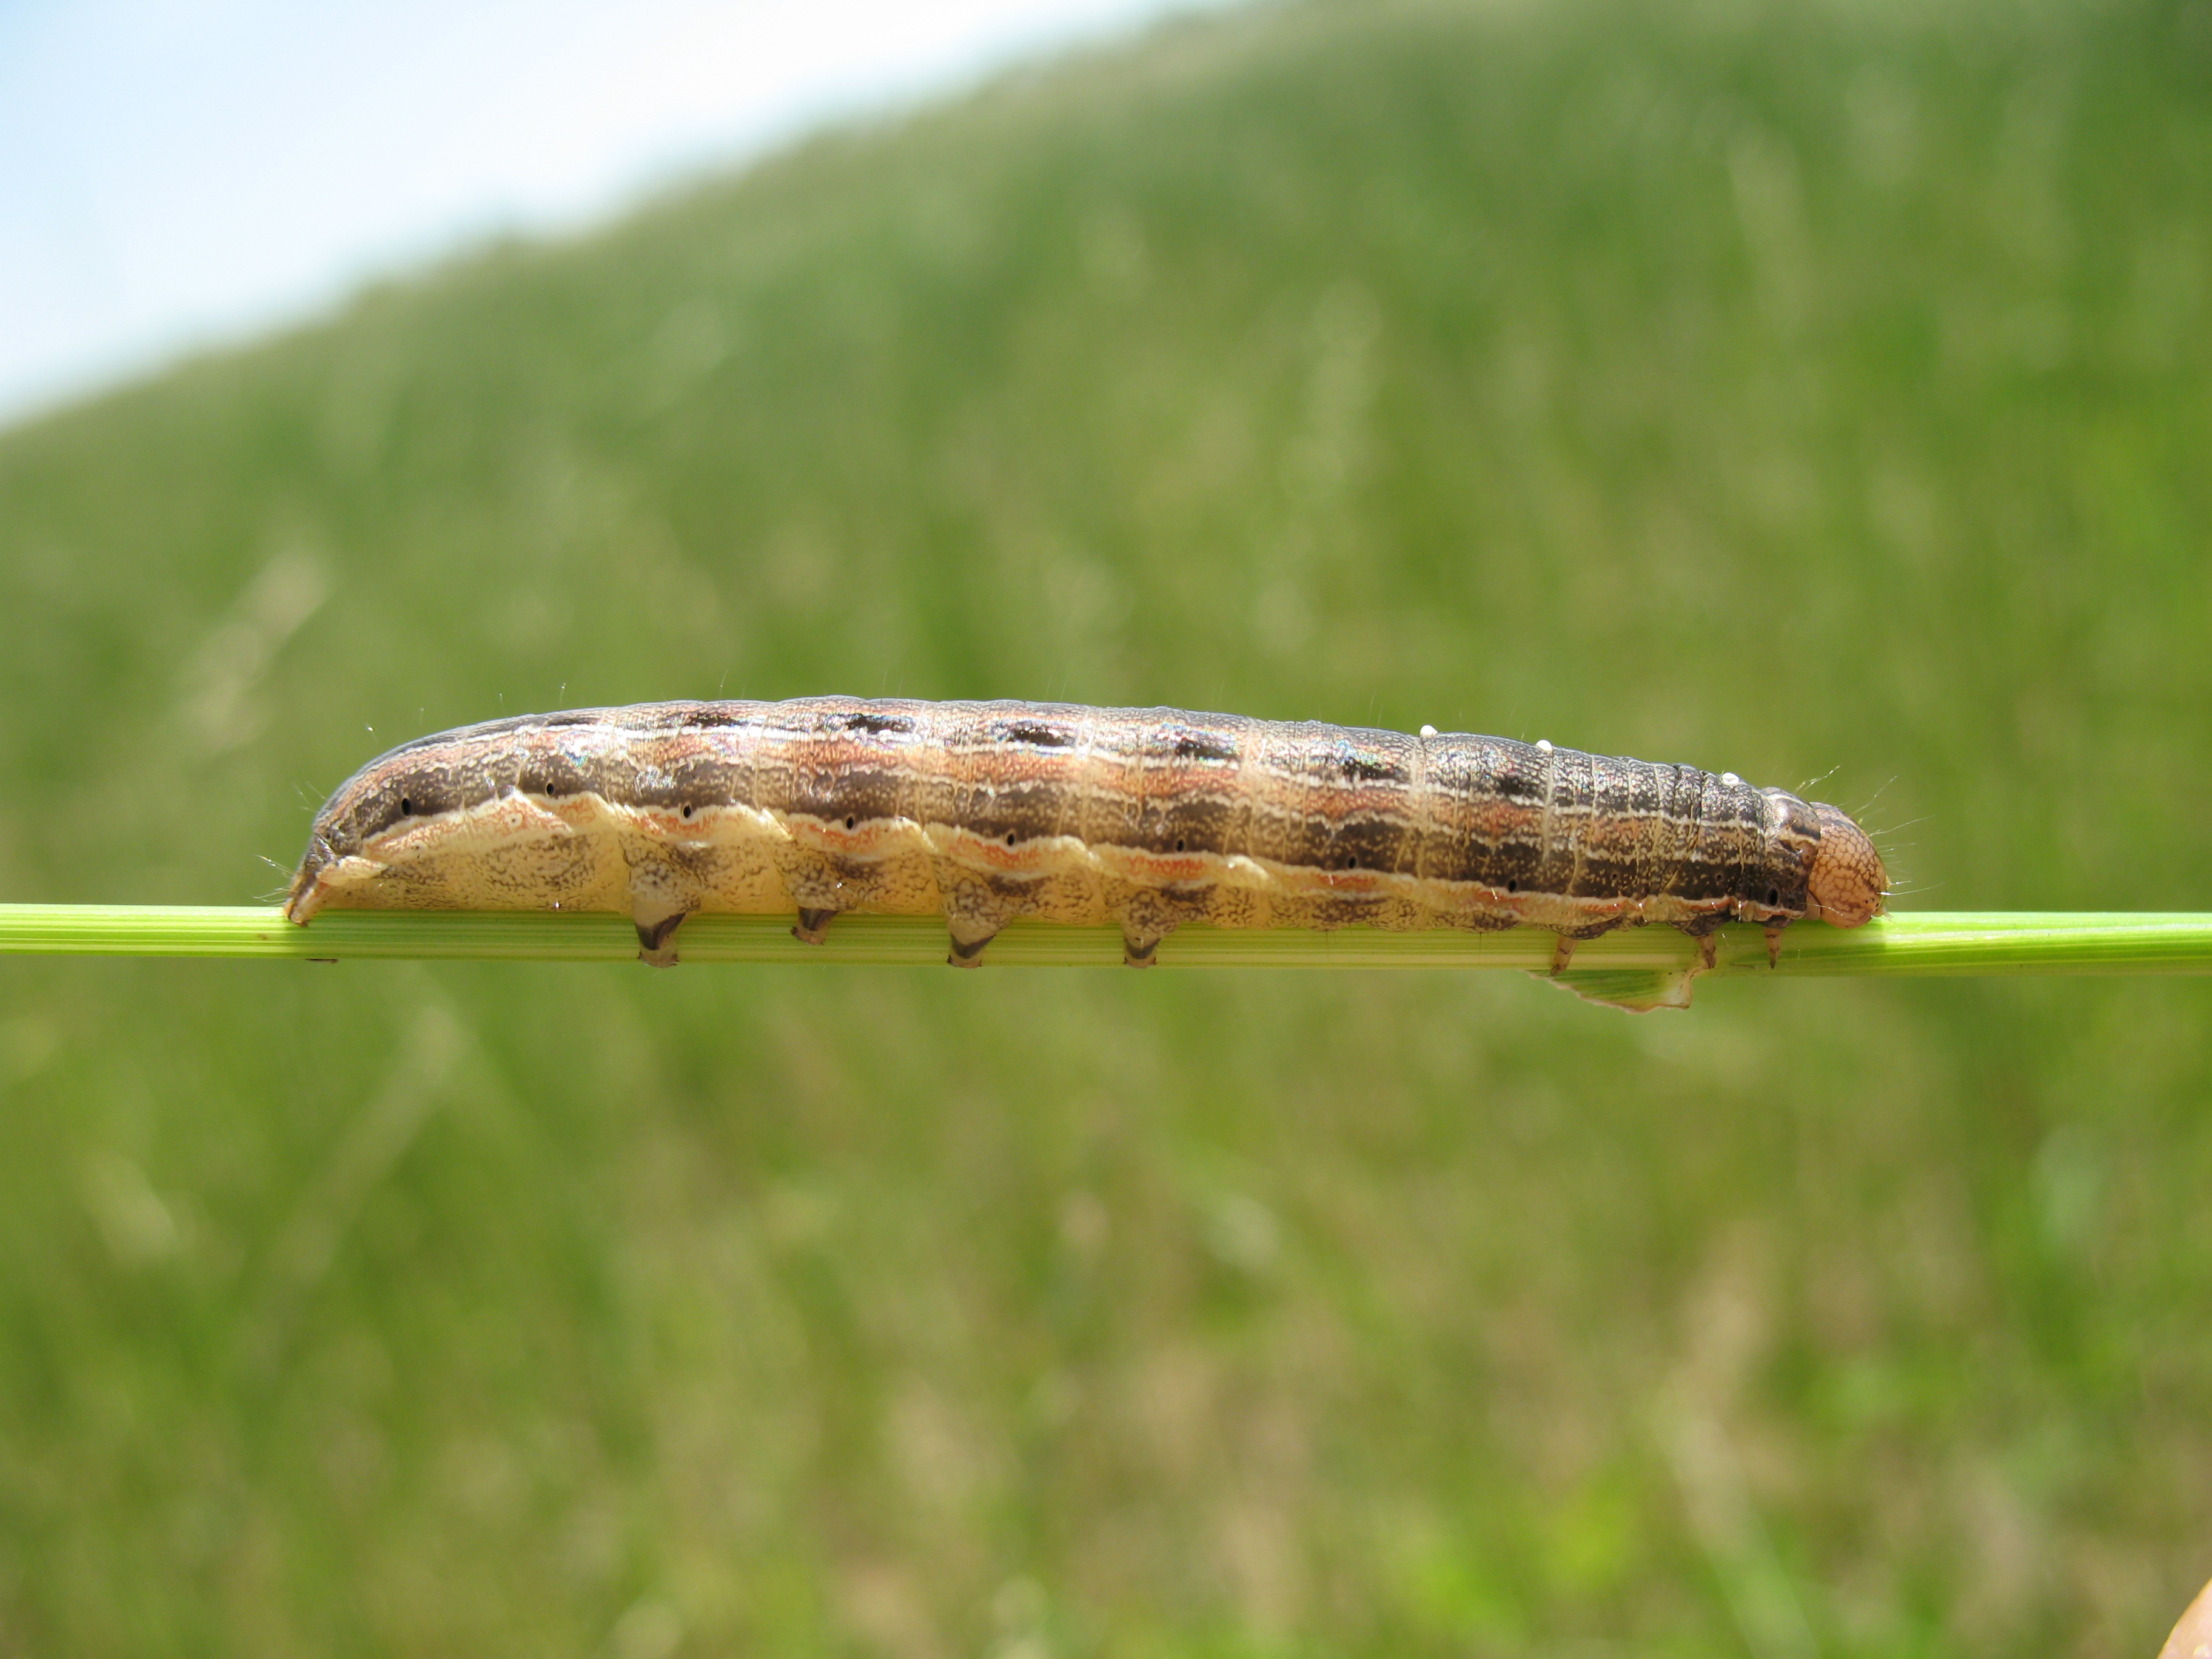 Now is time to scout for true armyworms in Missouri